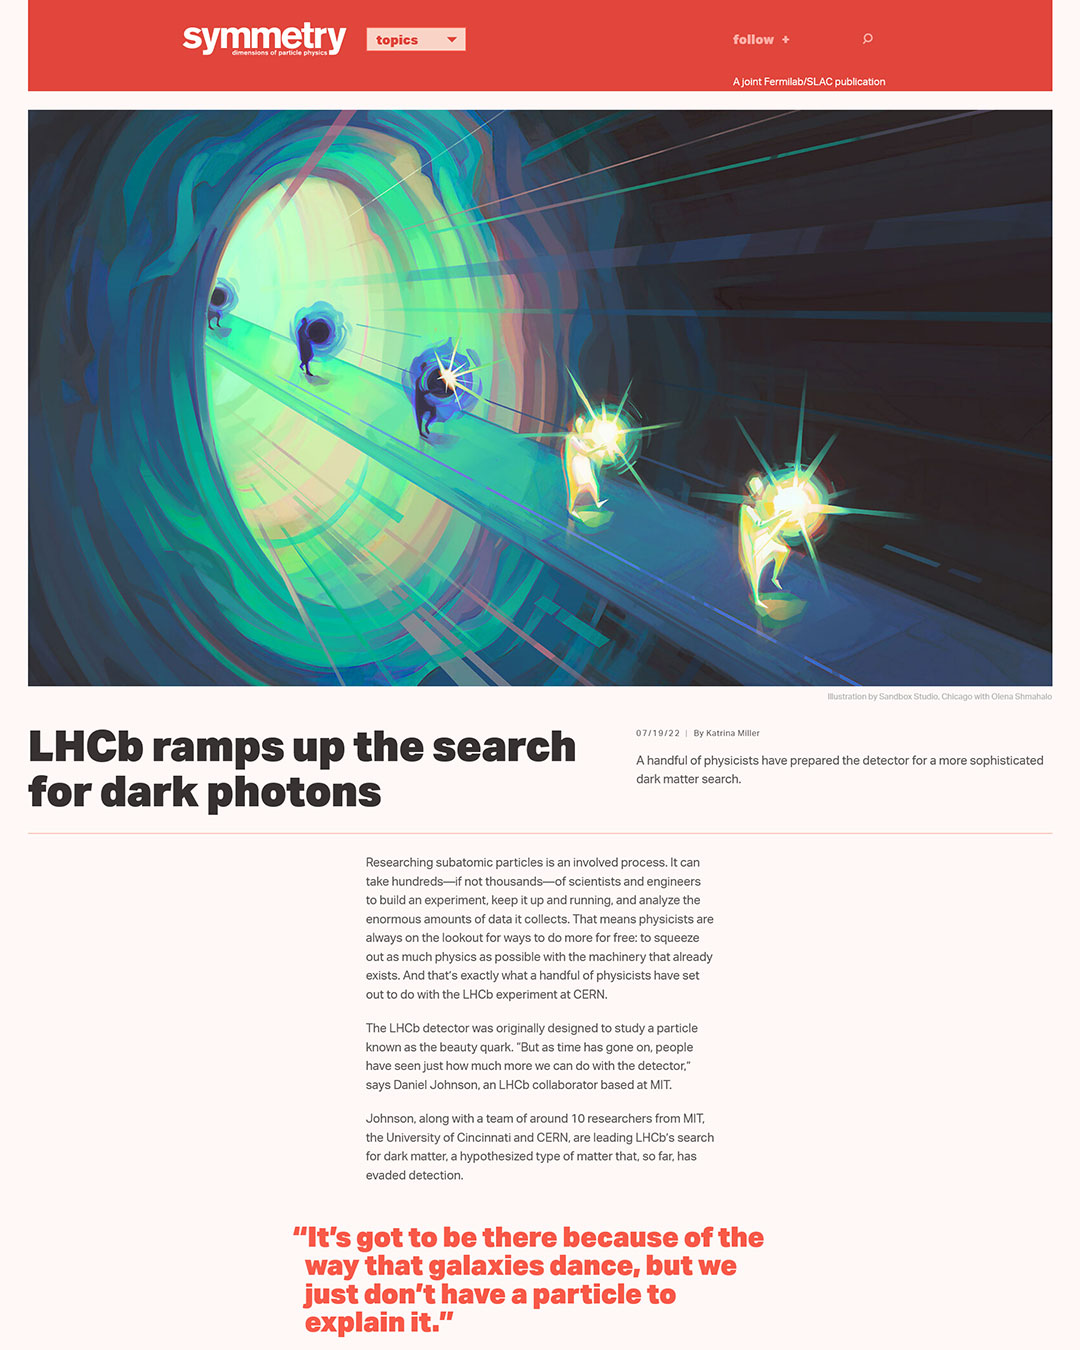 Screenshot of the article on symmetrymagazine.org: LHCb ramps up the search for dark photons.